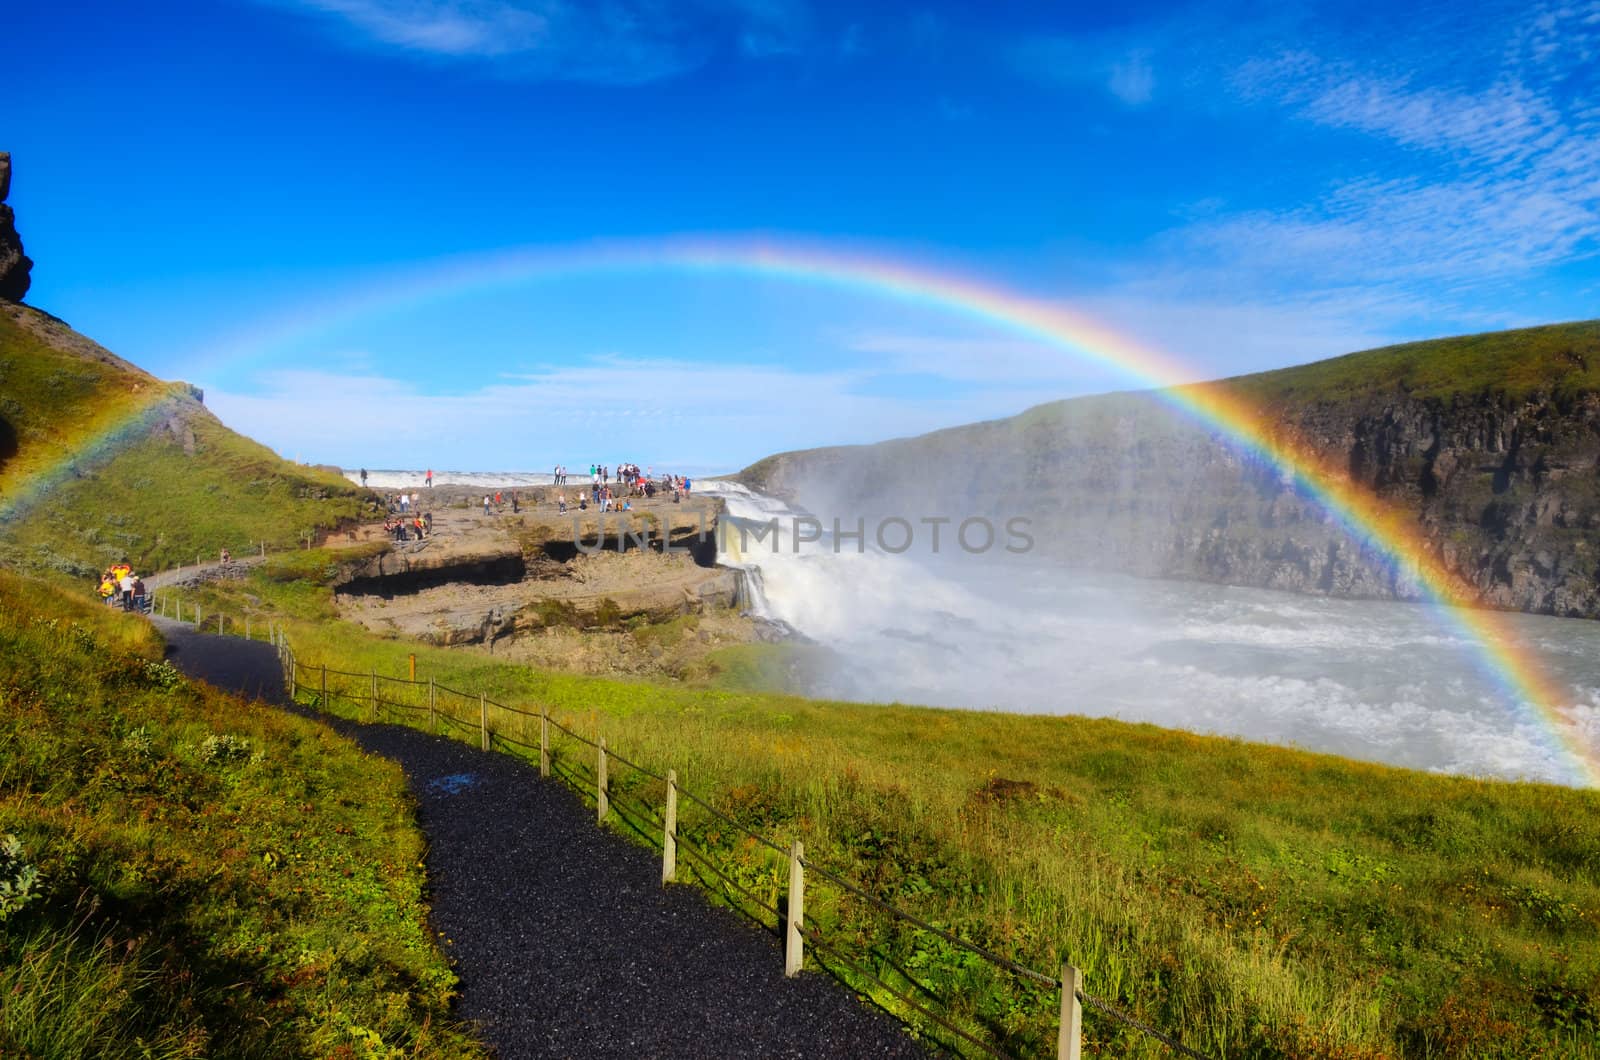 Gullfoss wild waterfall, strong running water and rainbow, Iceland by martinm303